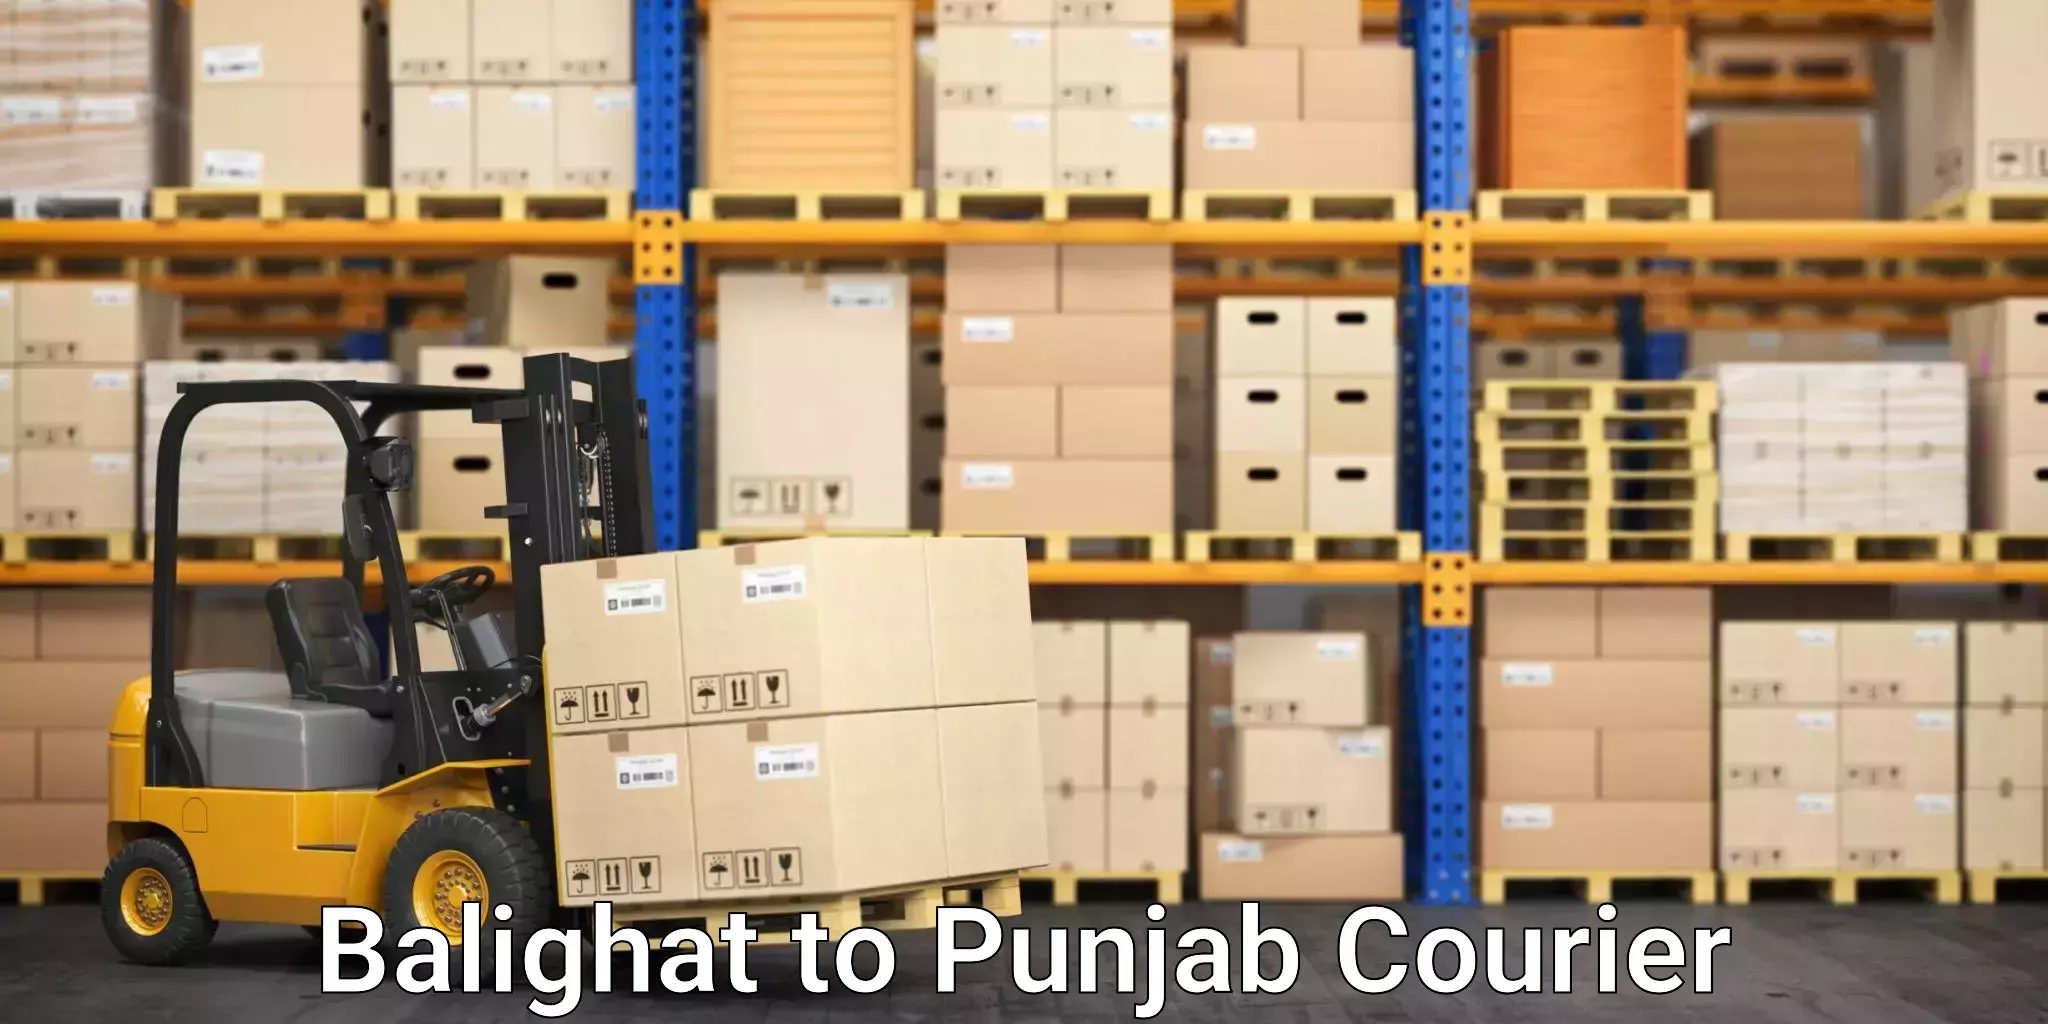 Global freight services Balighat to Punjab